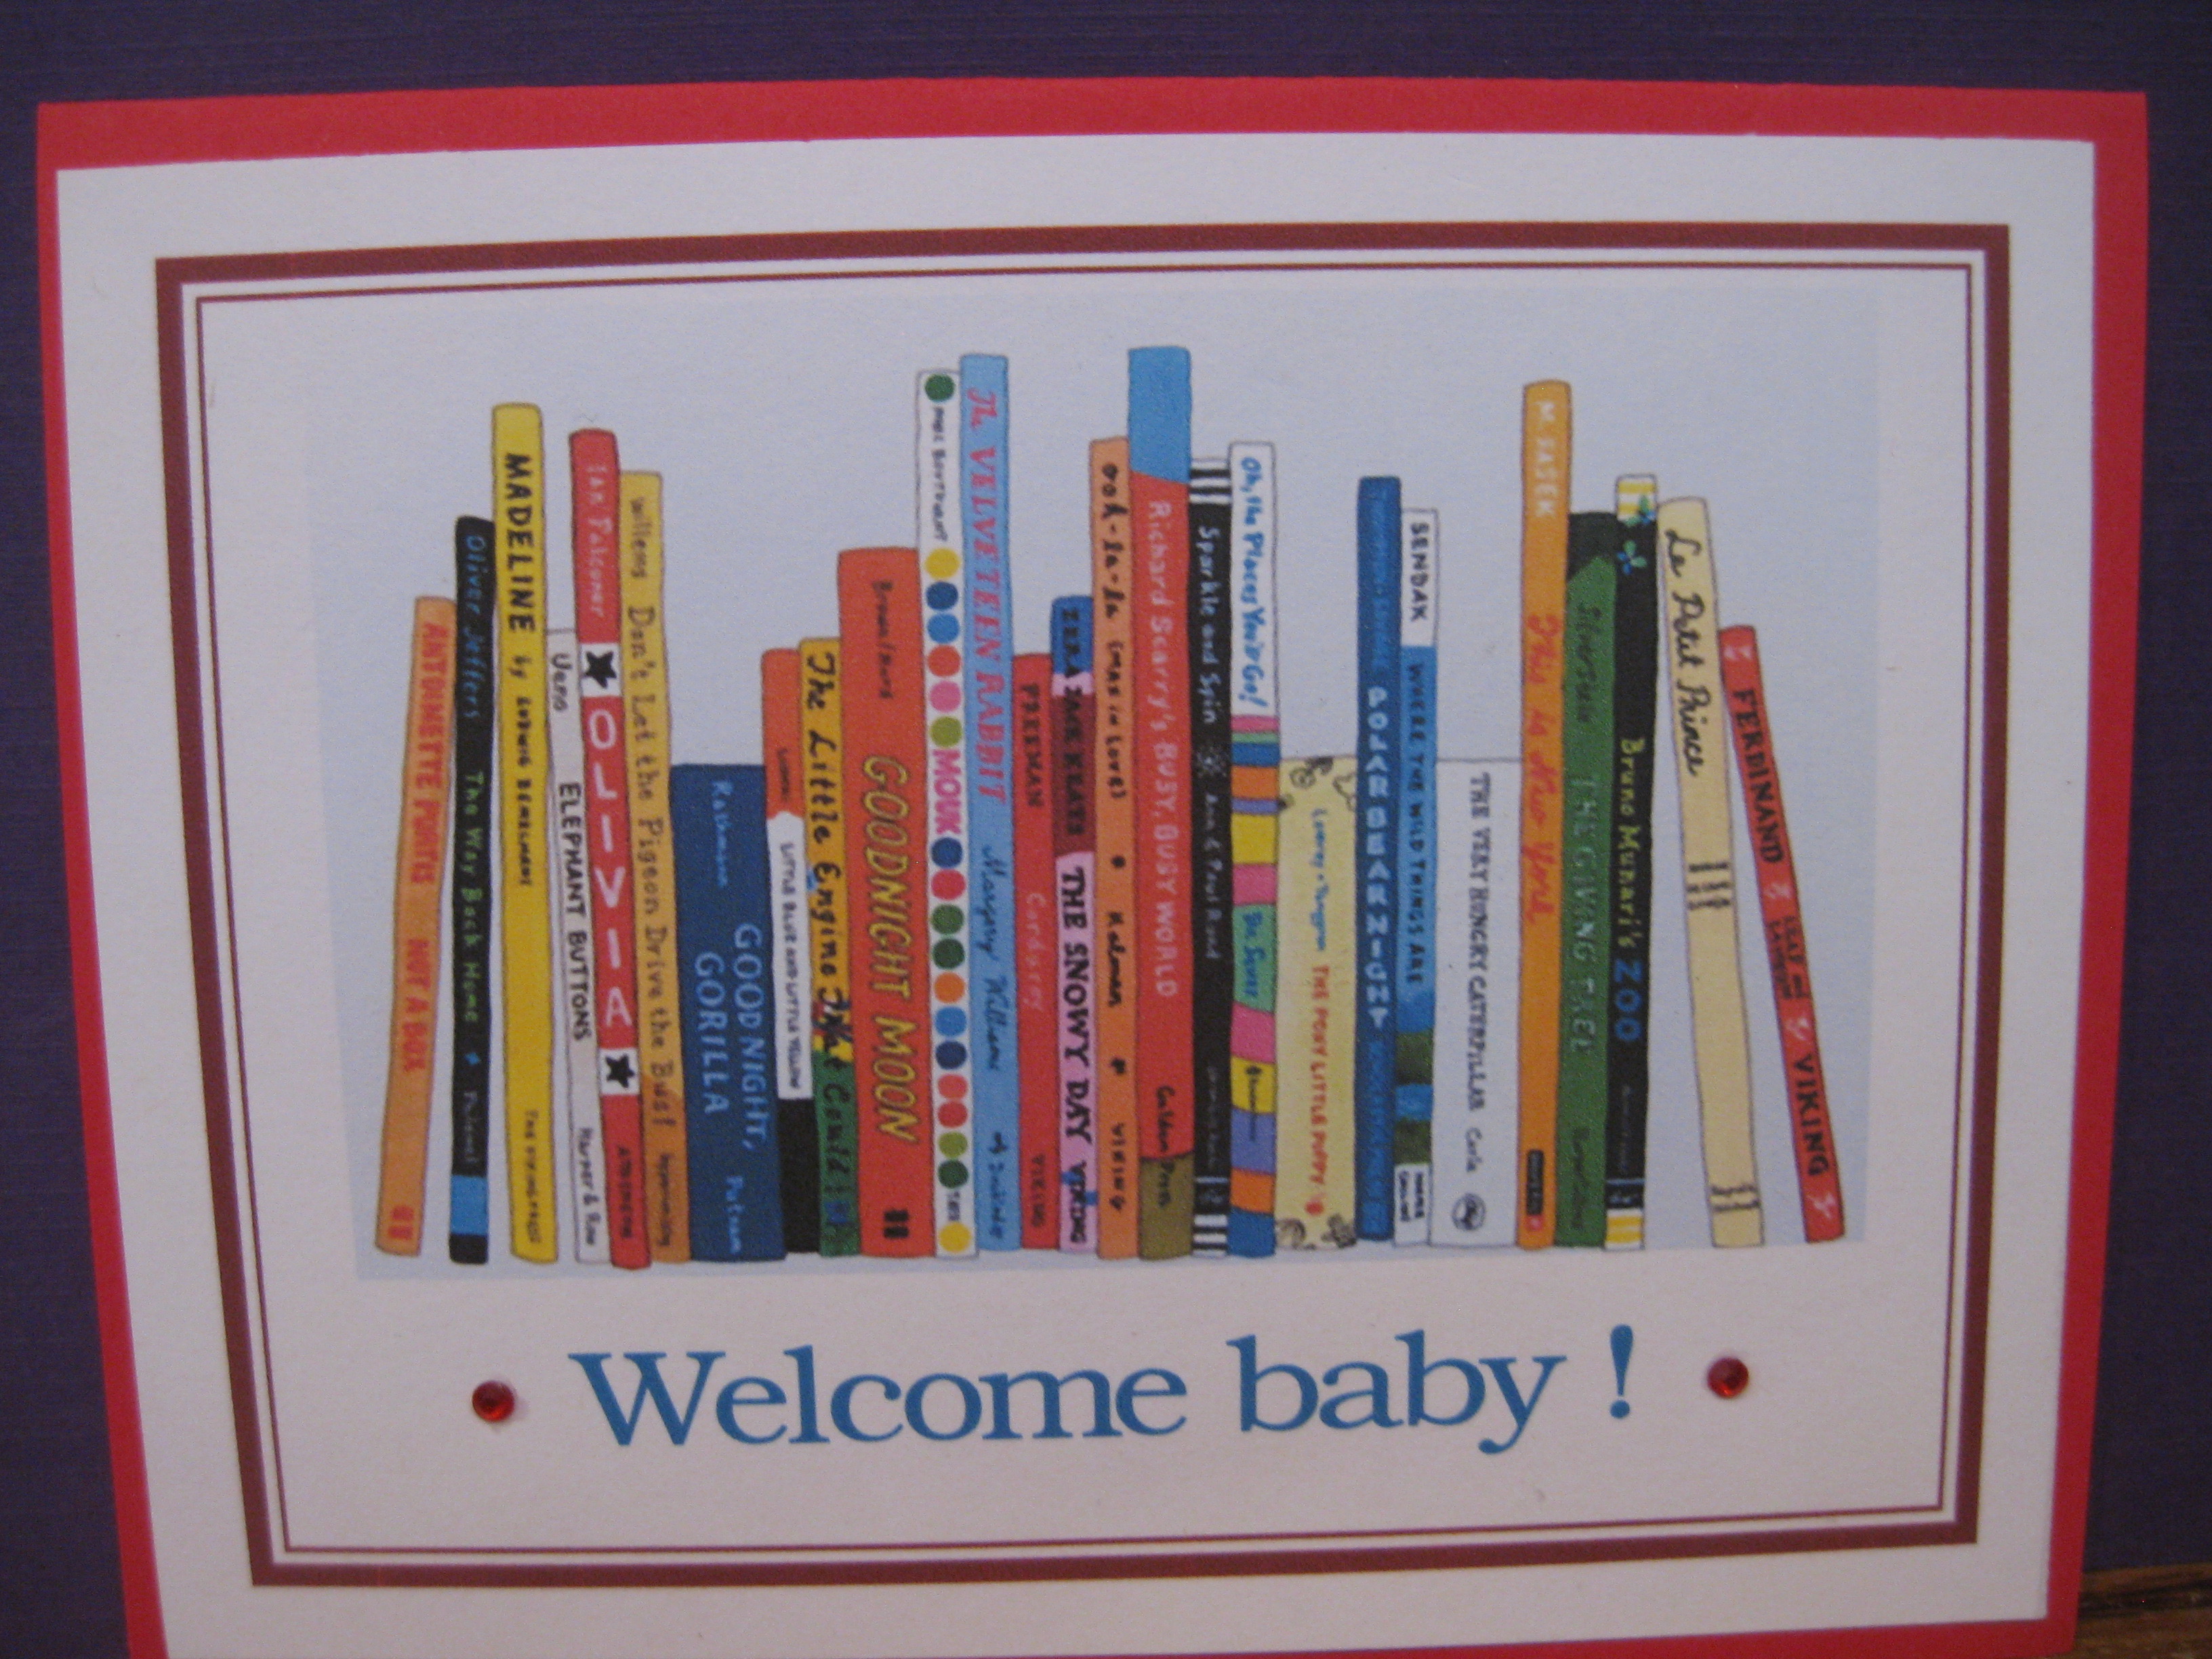 Welcome baby/books